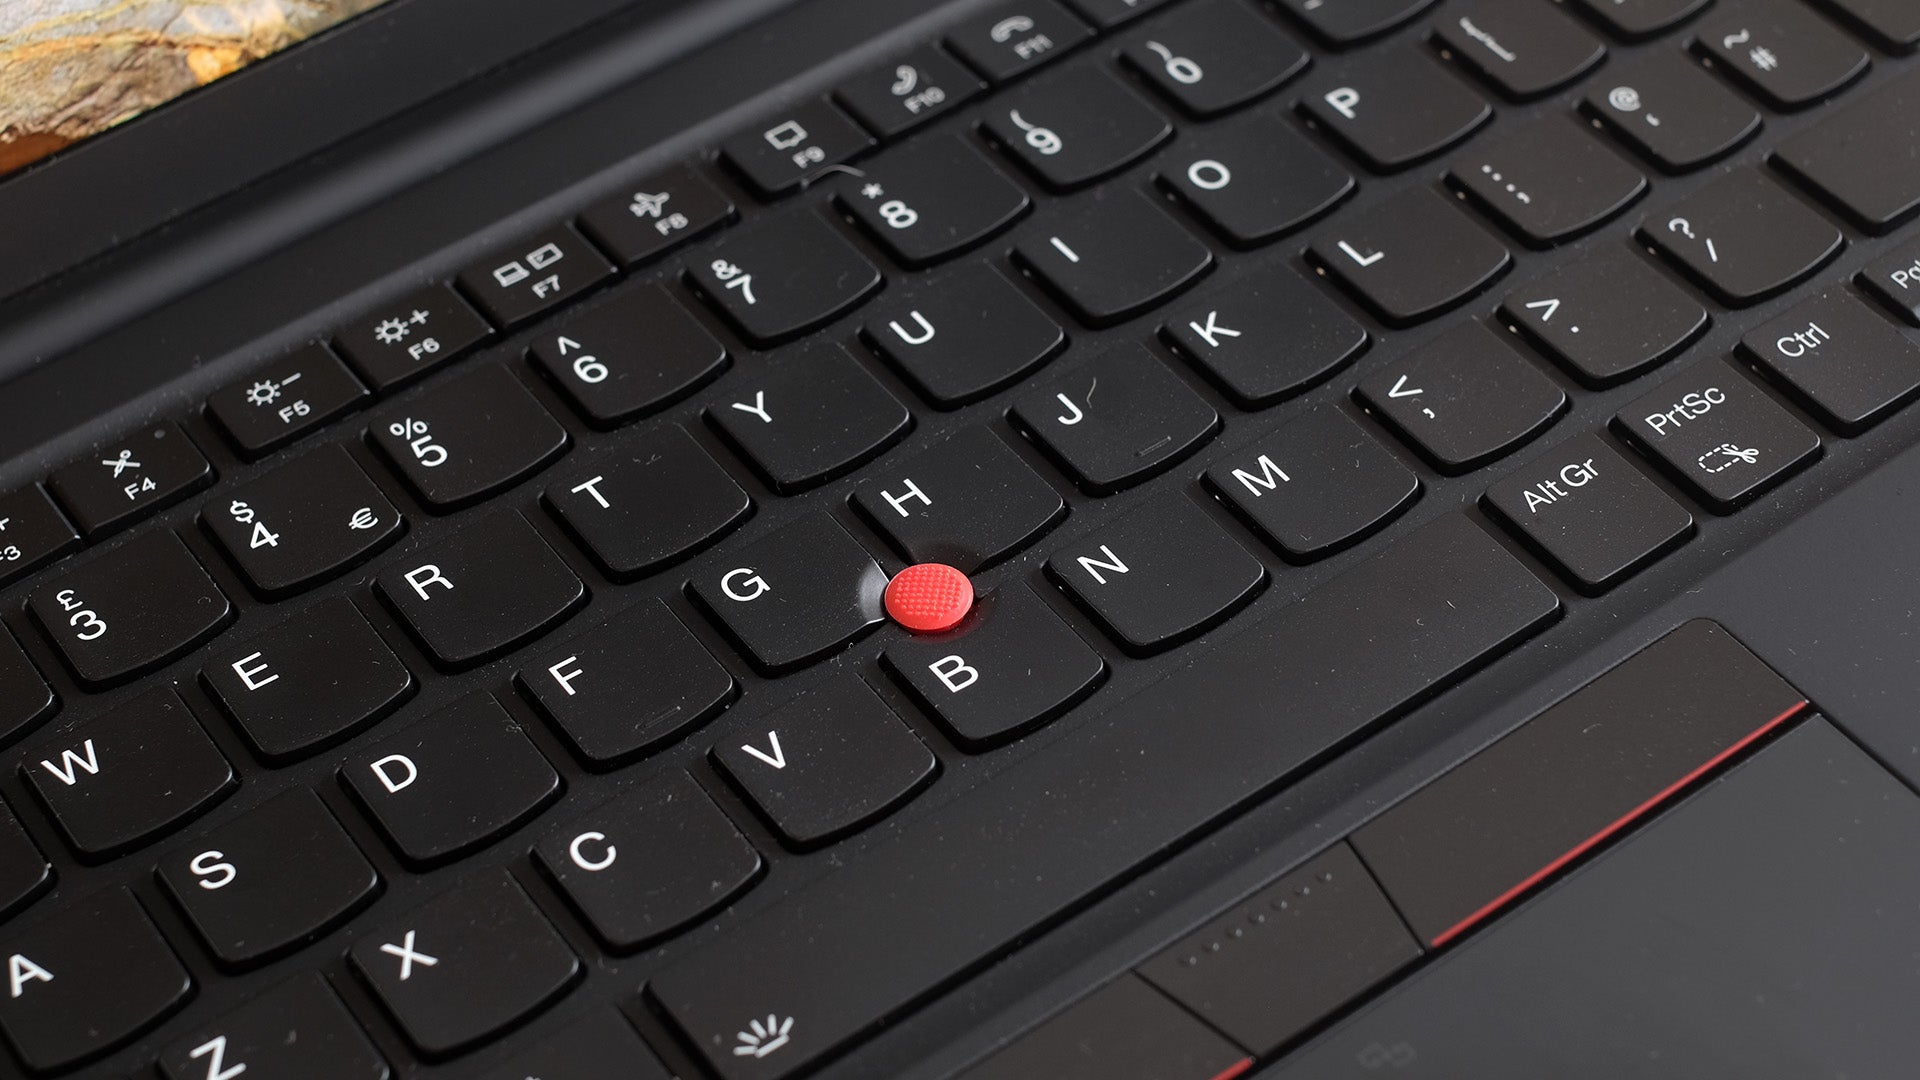 Lenovo ThinkPad X1 Carbon Gen 10 Review | Trusted Reviews